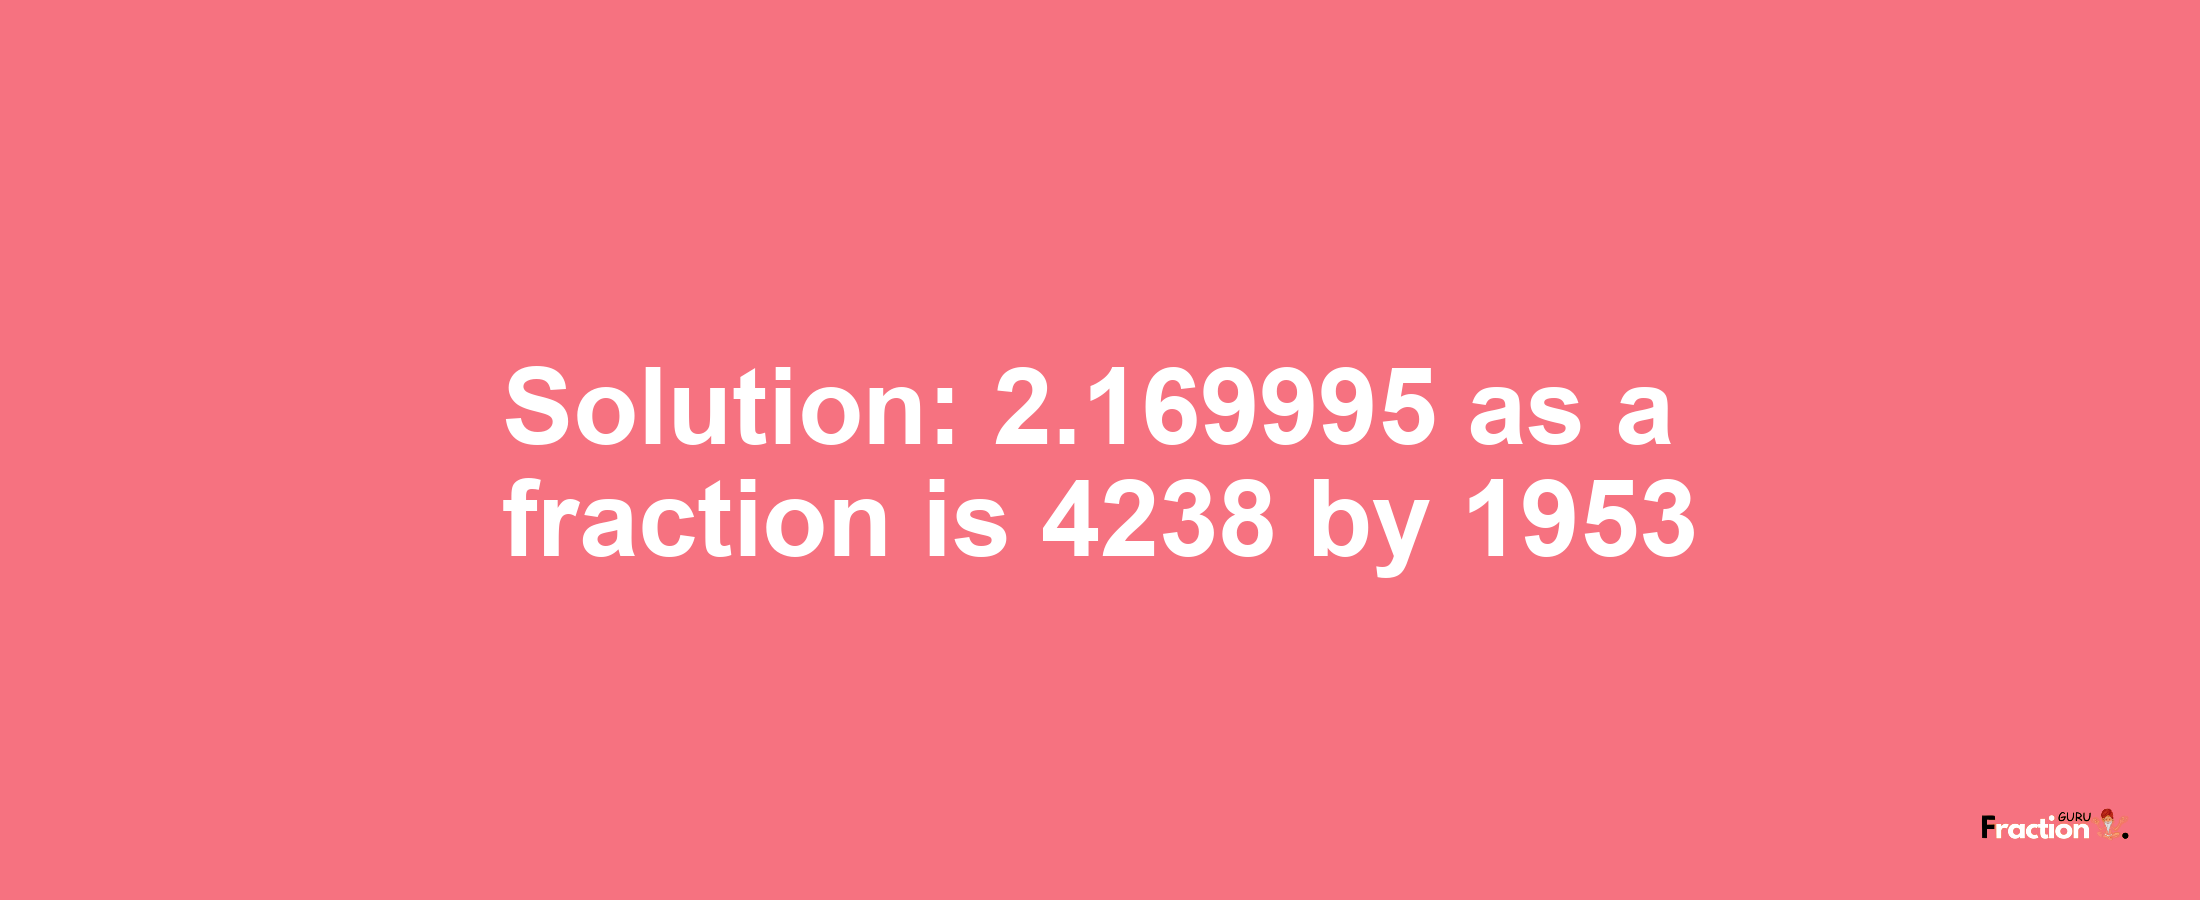 Solution:2.169995 as a fraction is 4238/1953